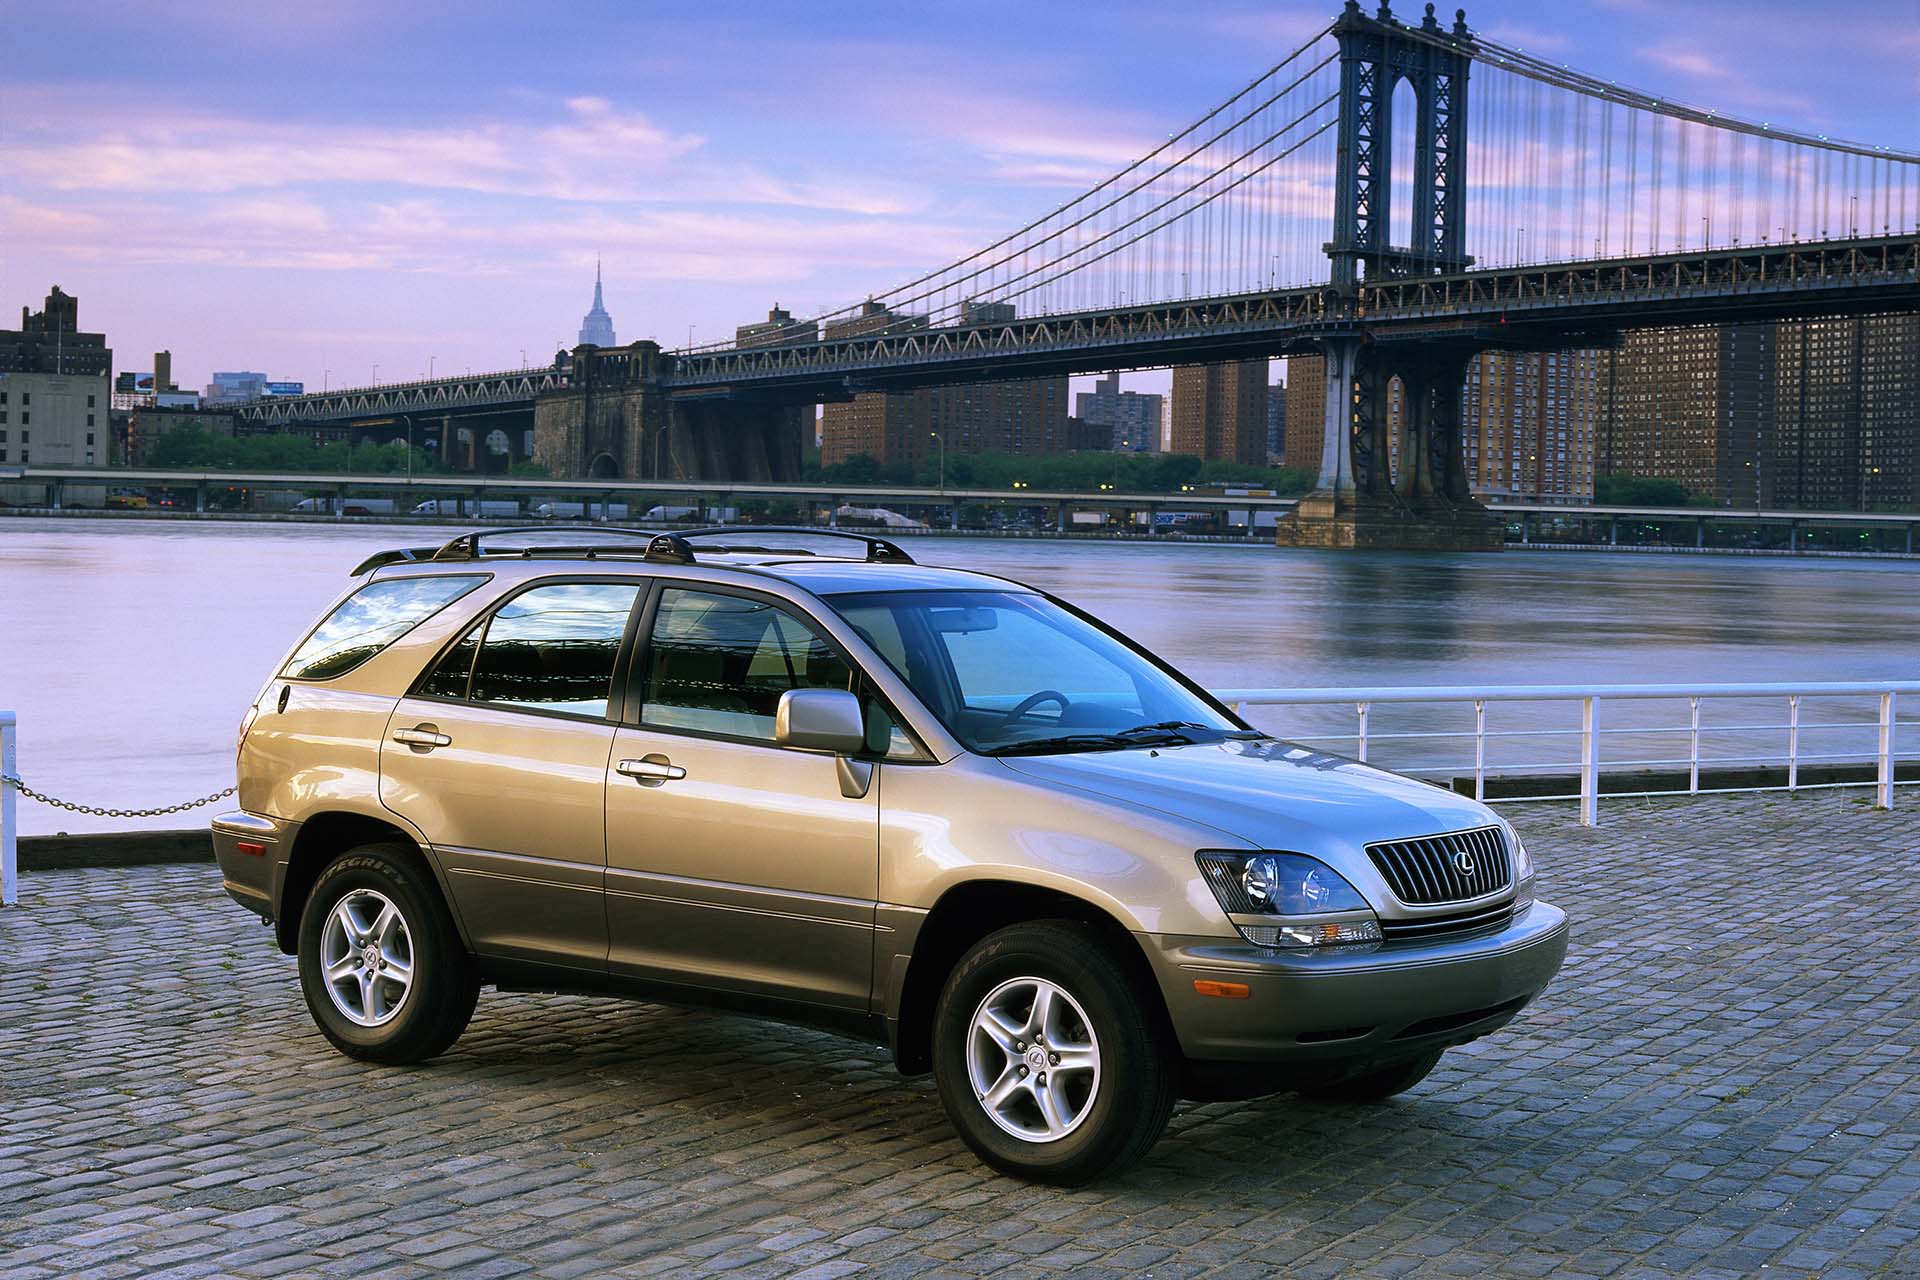 The first RX300 arrived as a 1998 model with a 220-hp V6, a four-speed automatic transmission and all-wheel drive. Compared to the Harrier, the interior appointments were greatly improved, including Walnut trim and a six-CD changer.